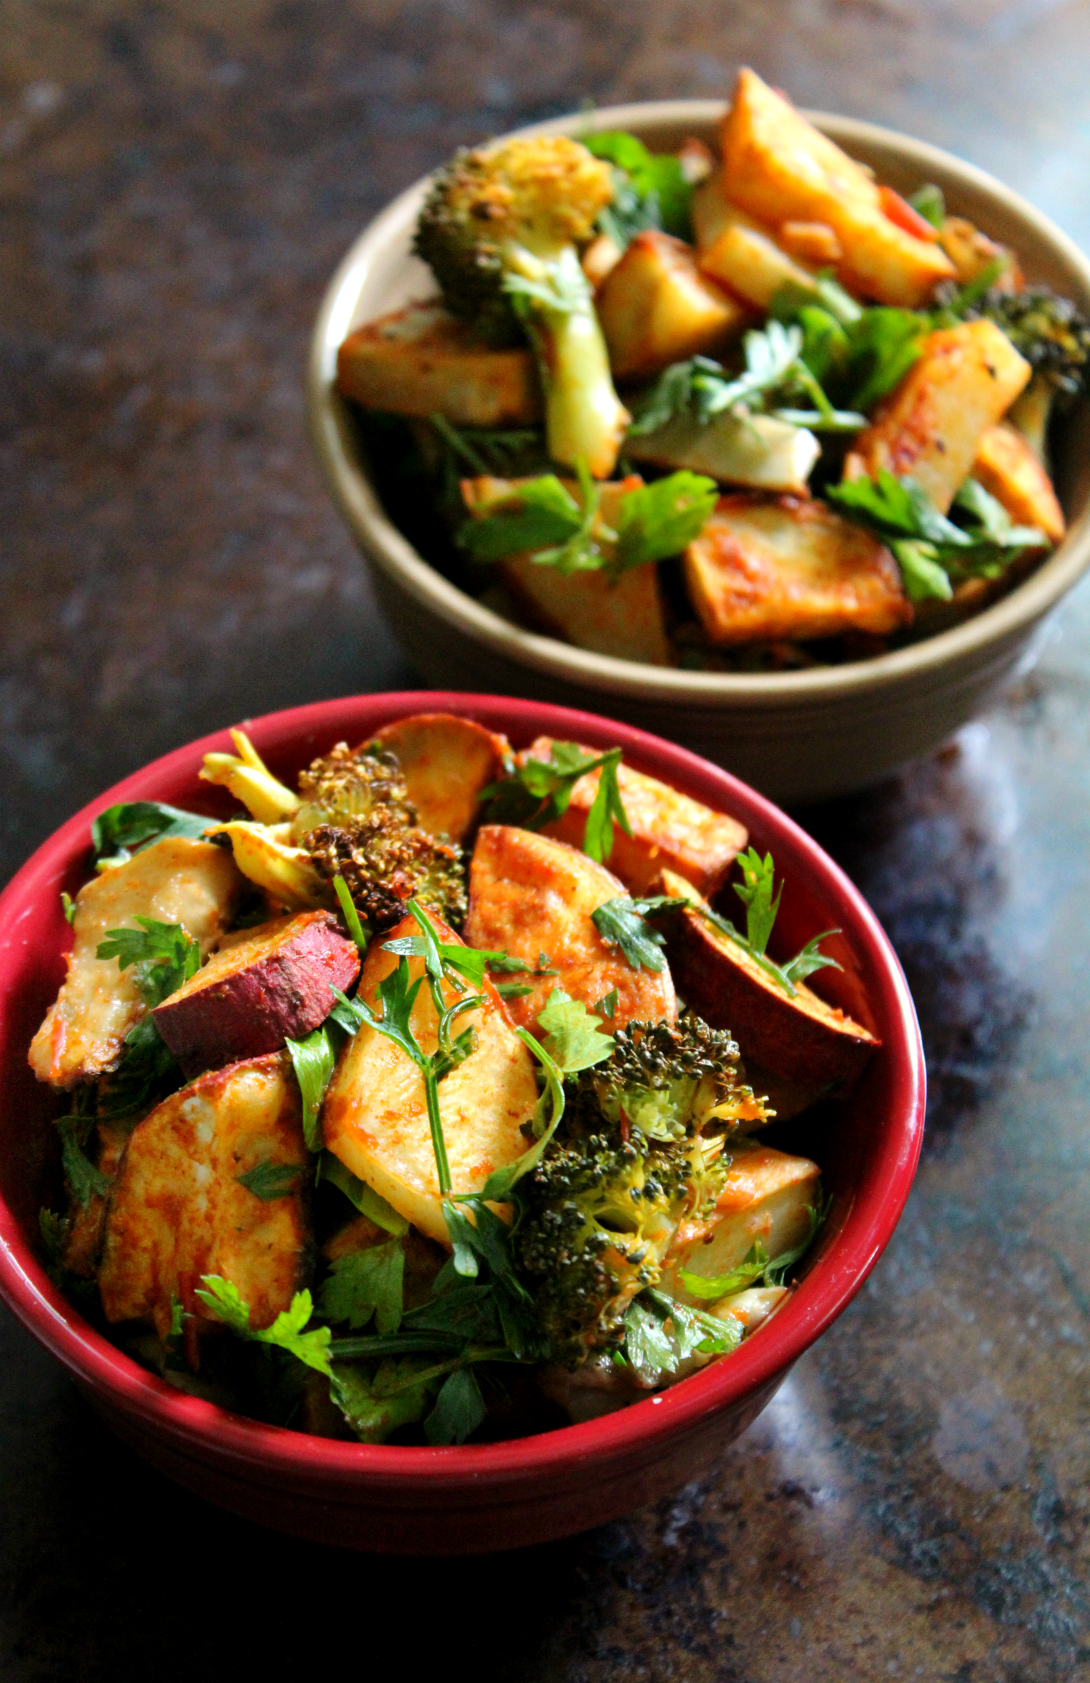 Harissa Potato Salad | Strength and Sunshine @RebeccaGF666 Two types of potatoes, broccoli, and eggplant roasted to perfection and paired with a smoky and spicy harissa sauce. A harissa potato salad, gluten-free, vegan, and paleo, that will elevate you bland dinner side dish to an all new level!